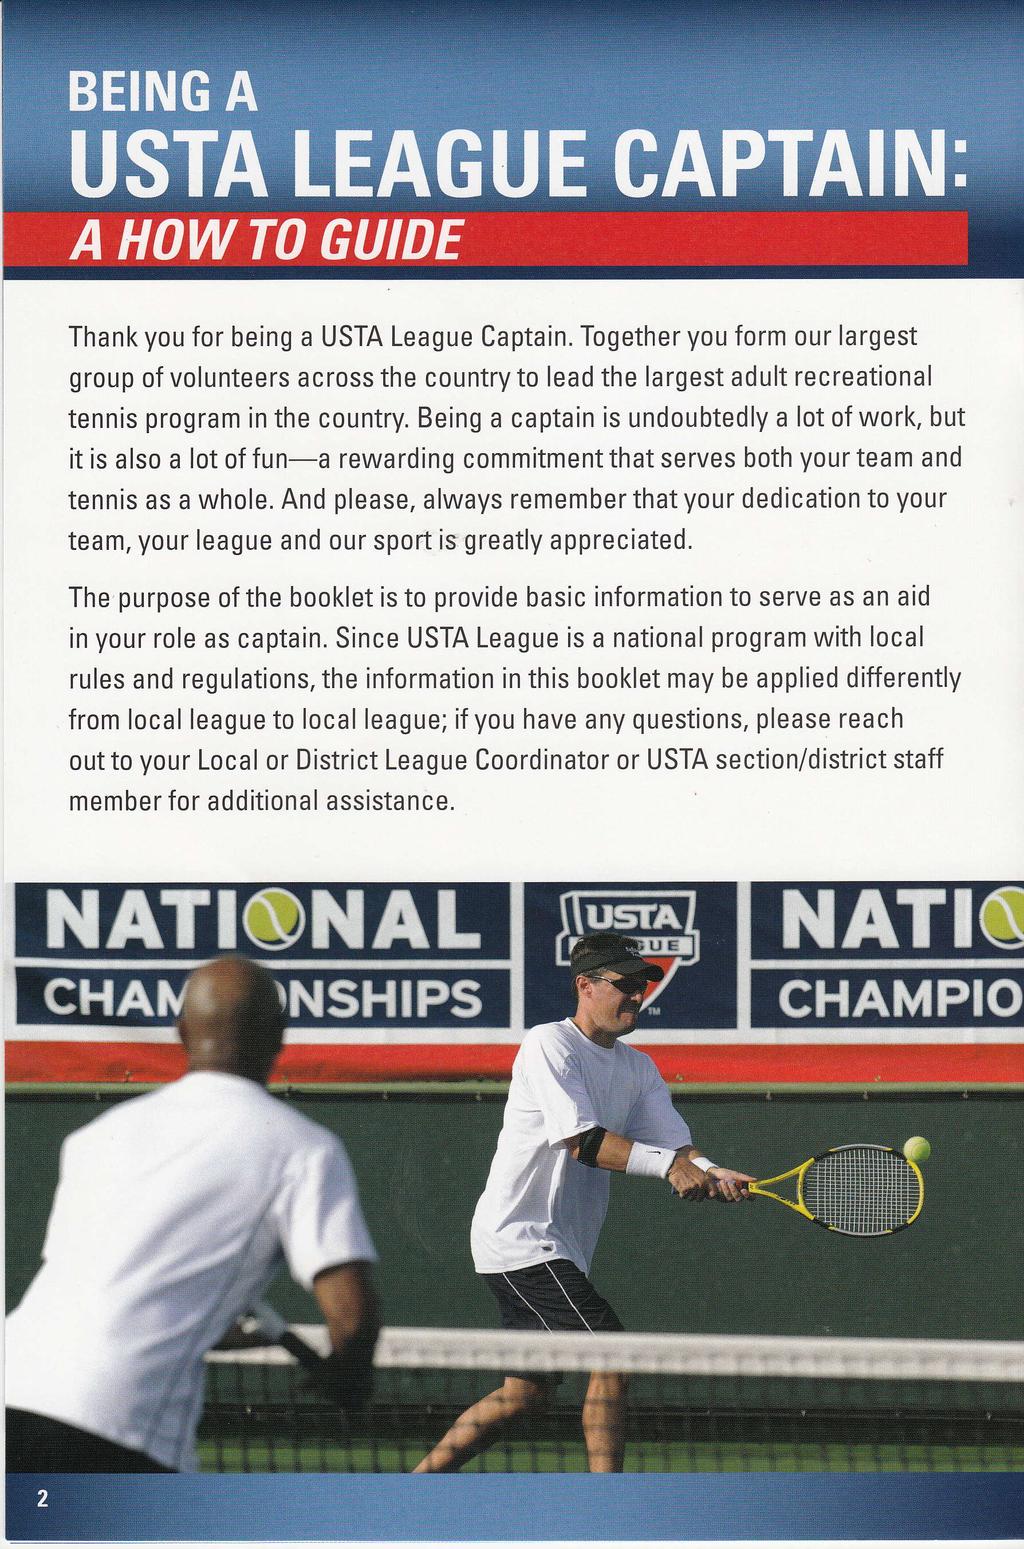 Thank you for being a USTA League Captain. Together you form our largest group of volunteers across the country to lead the largest adult recreational tennis program in the country.